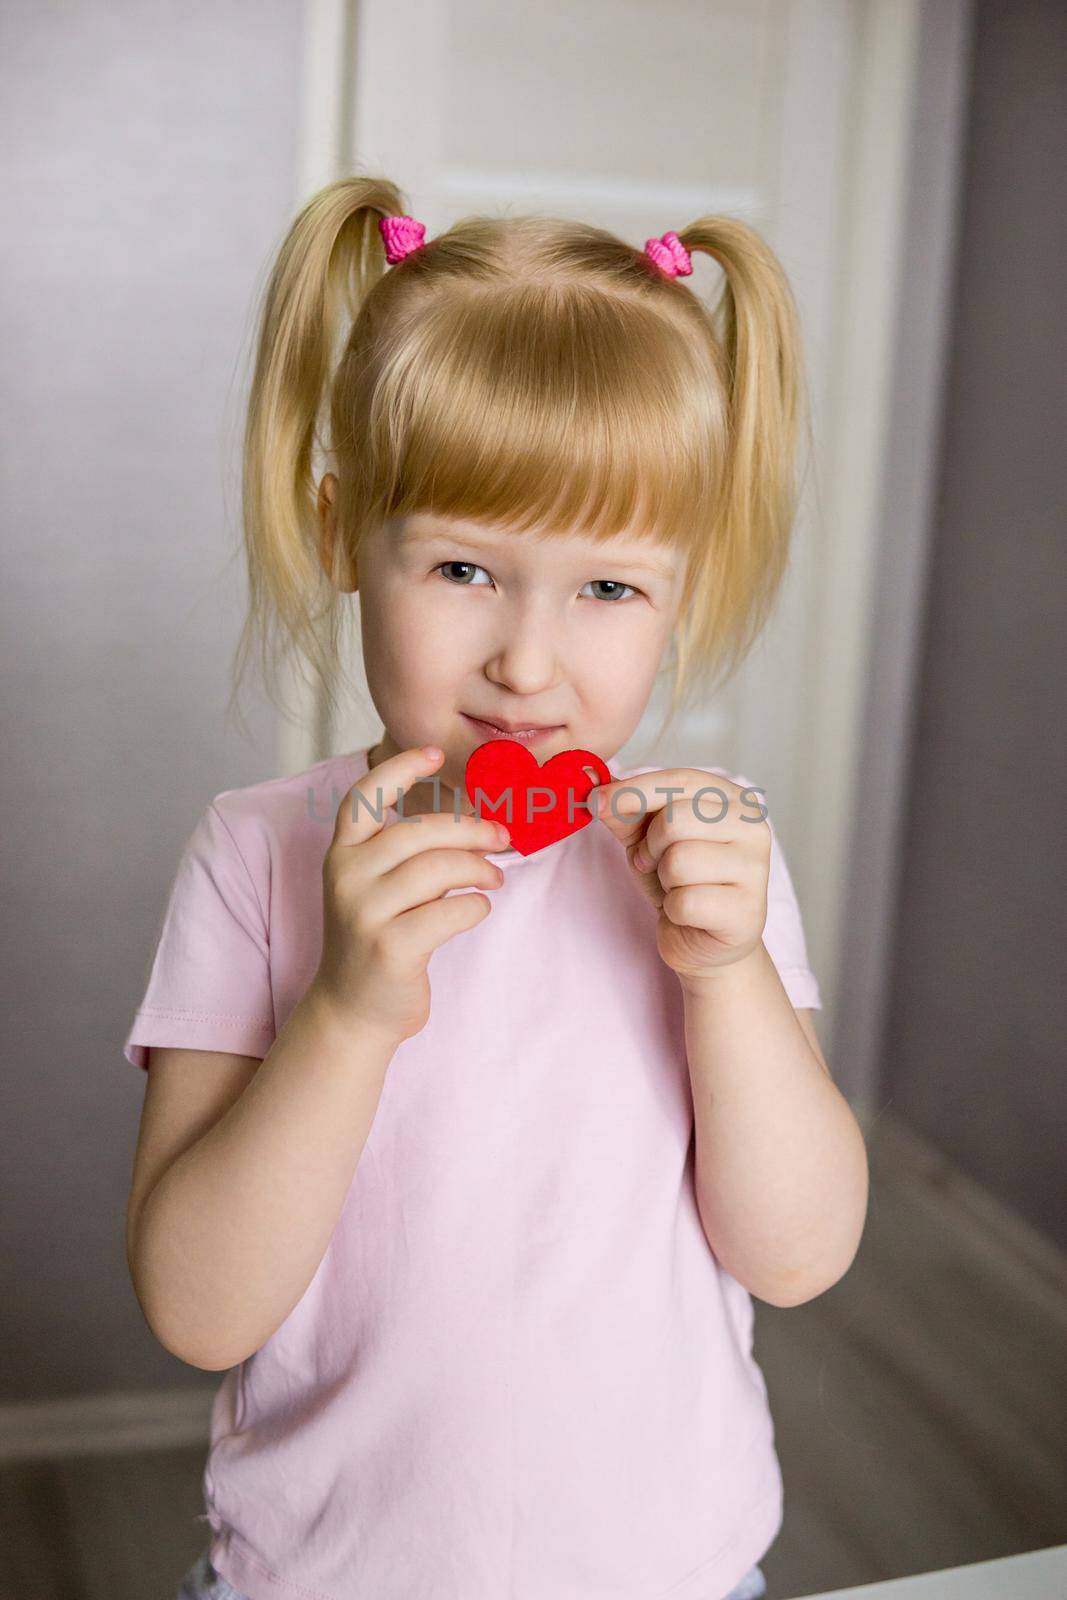 A blogger girl makes a felt craft for Valentine's Day in the shape of a heart. The concept of children's creativity and handmade.